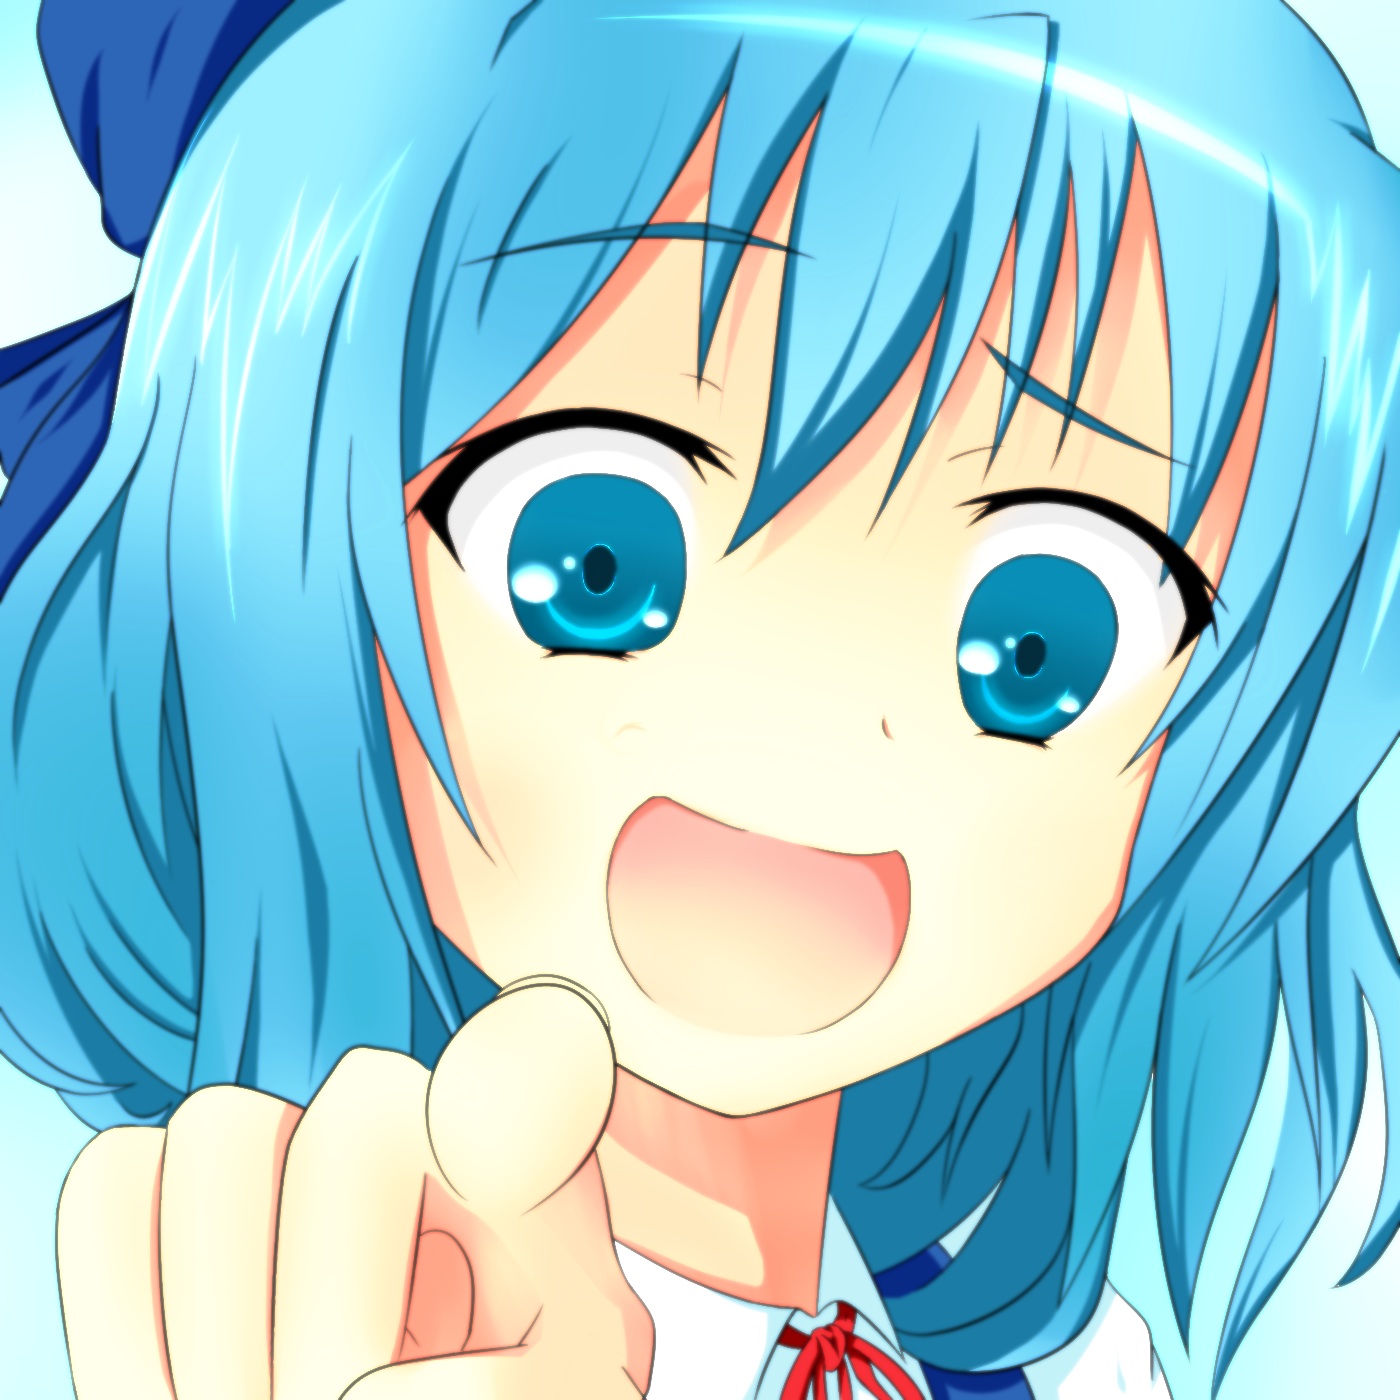 11399080. Ye must be referring to the Cirno thread already in progress. 